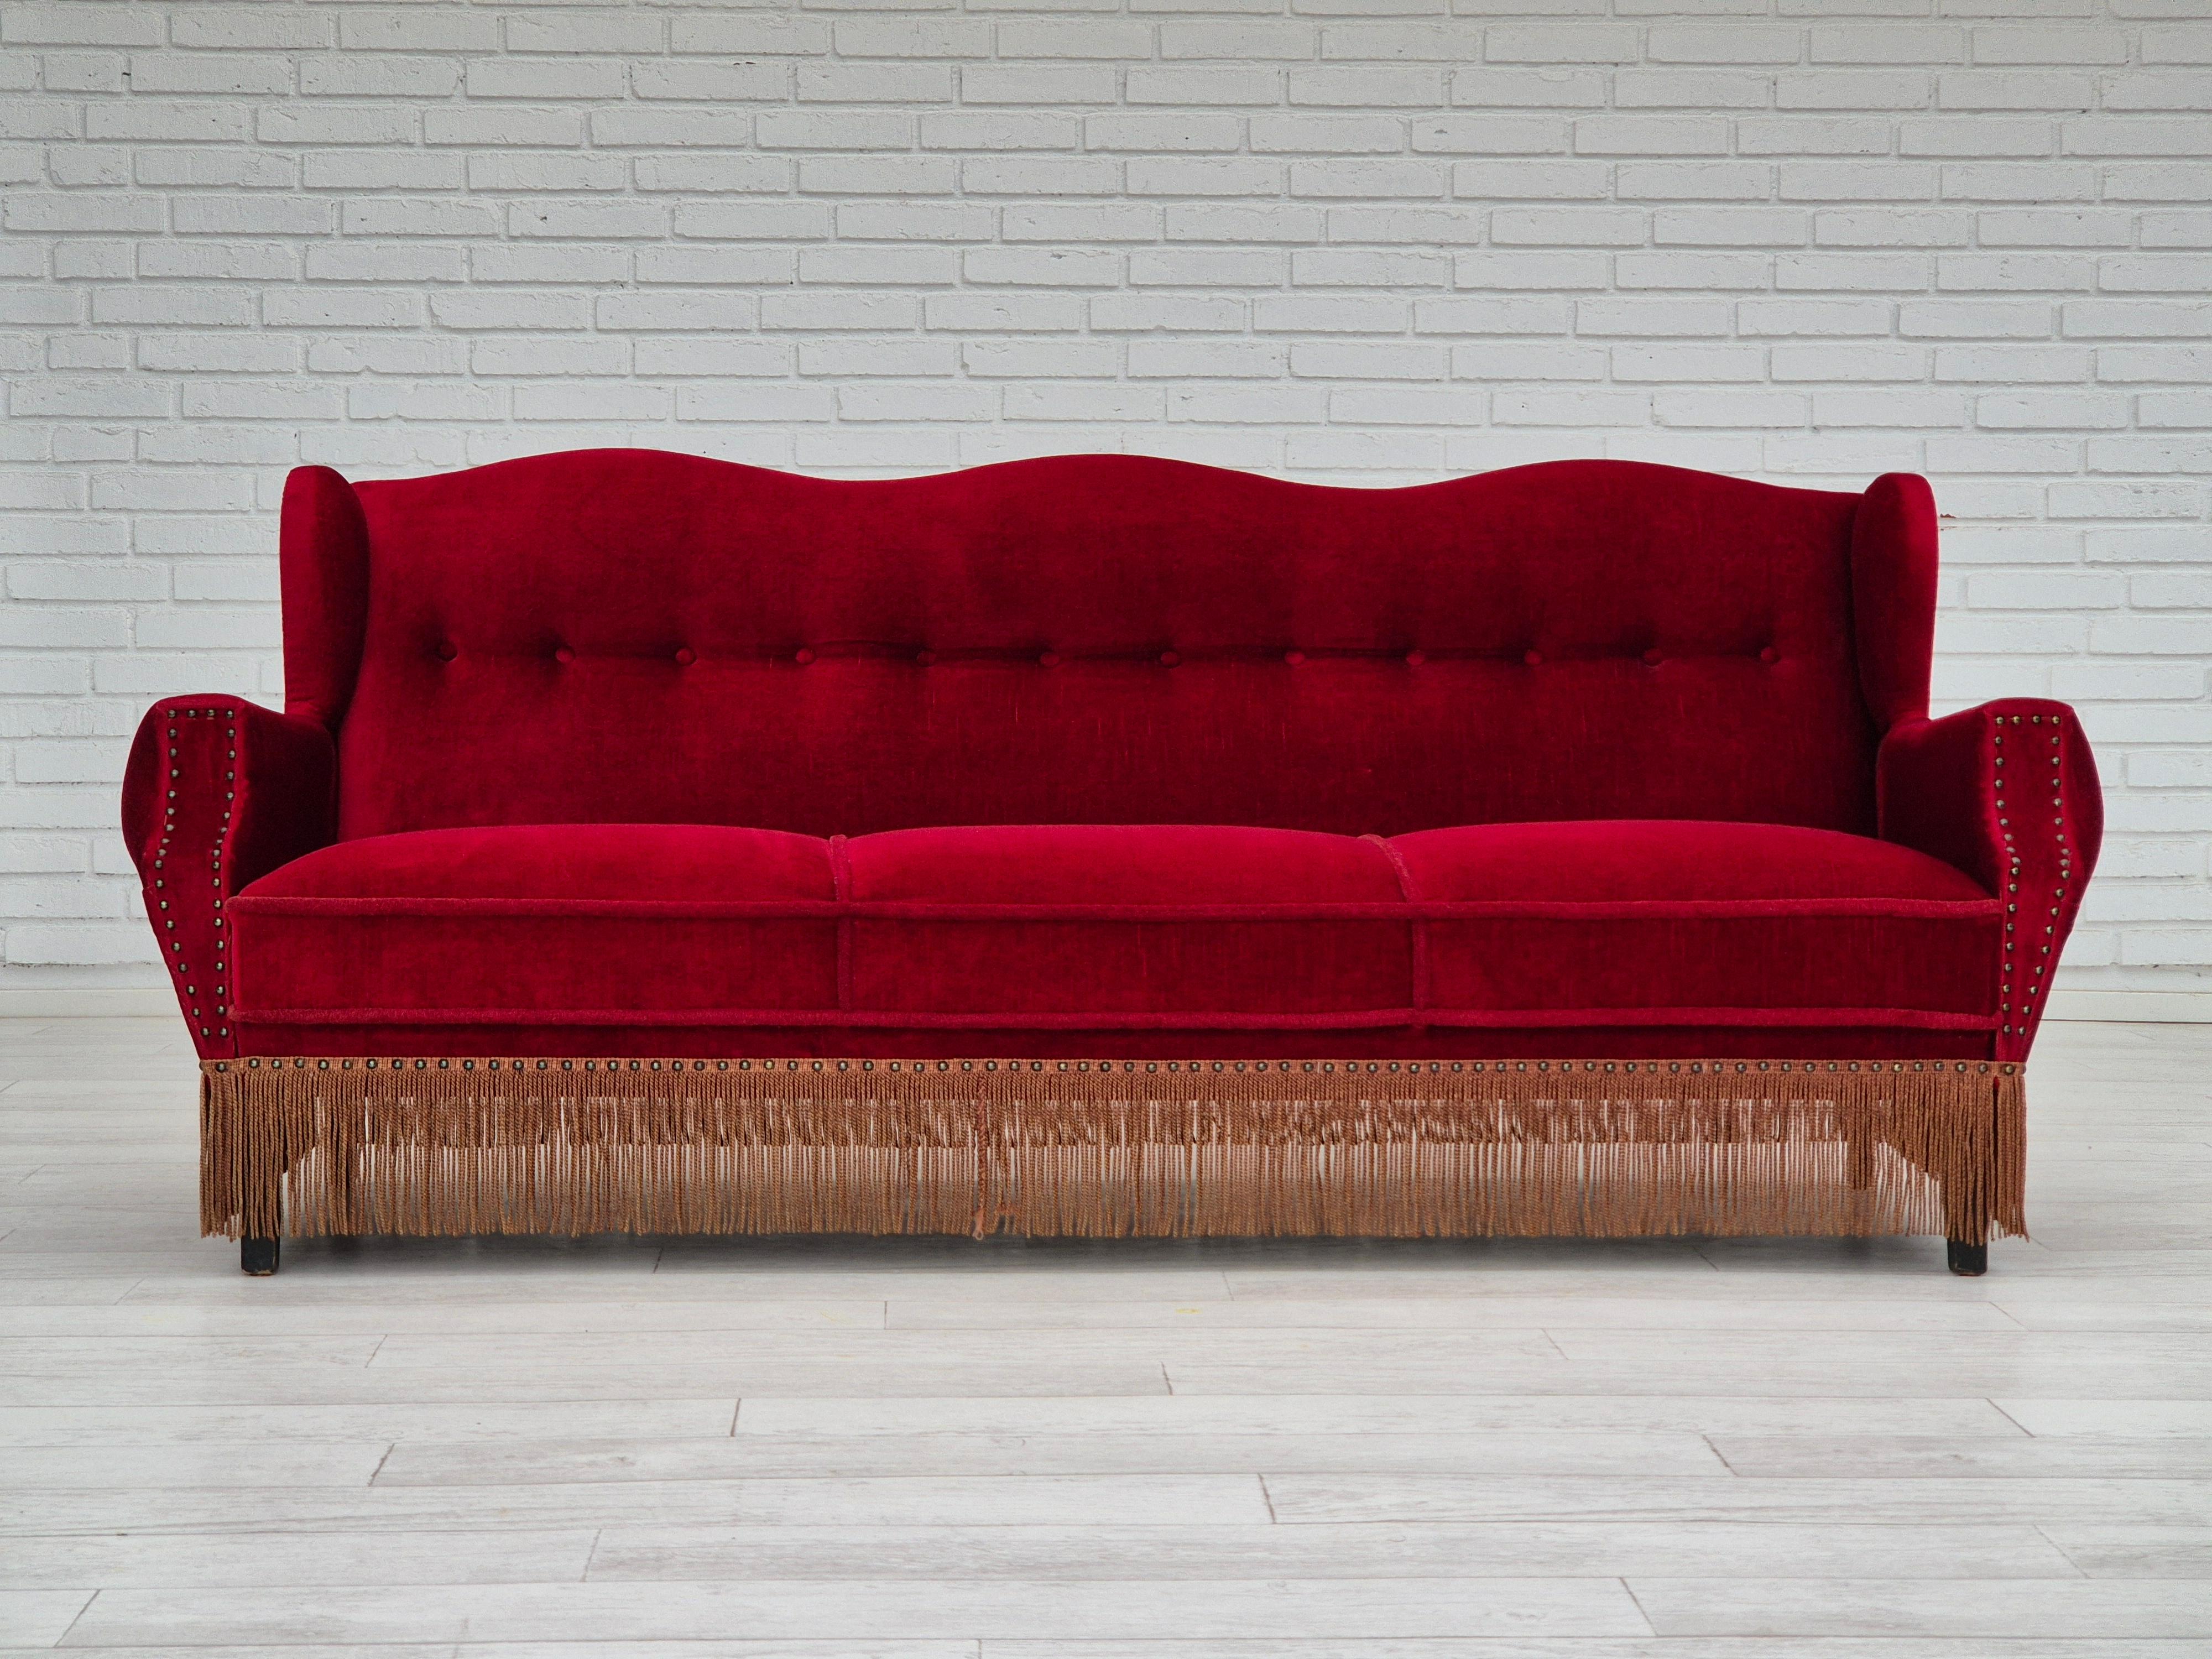 1960s, Danish 3 seater sofa in original very good condition: no smells and no stains. Cherry-red furniture velour, oak wood legs. Springs in the seat. Manufactured by Danish furniture manufacturer in about 1960s.